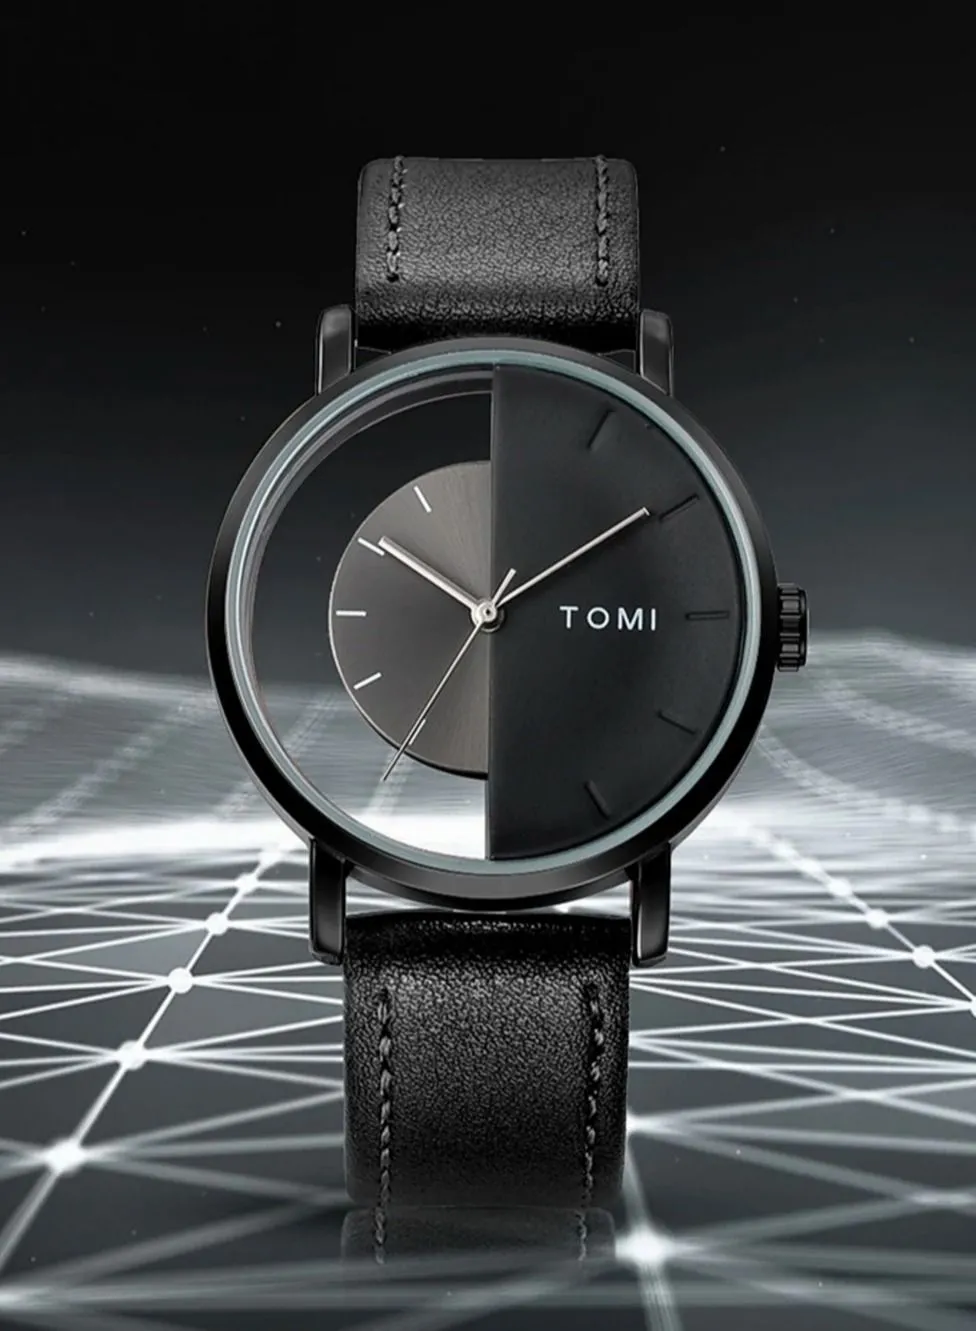 TOMI A stylish unisex wrist watch with black leather strap for men and women from TOMI, the watch face size is 40 mm and the thickness is 9 mm